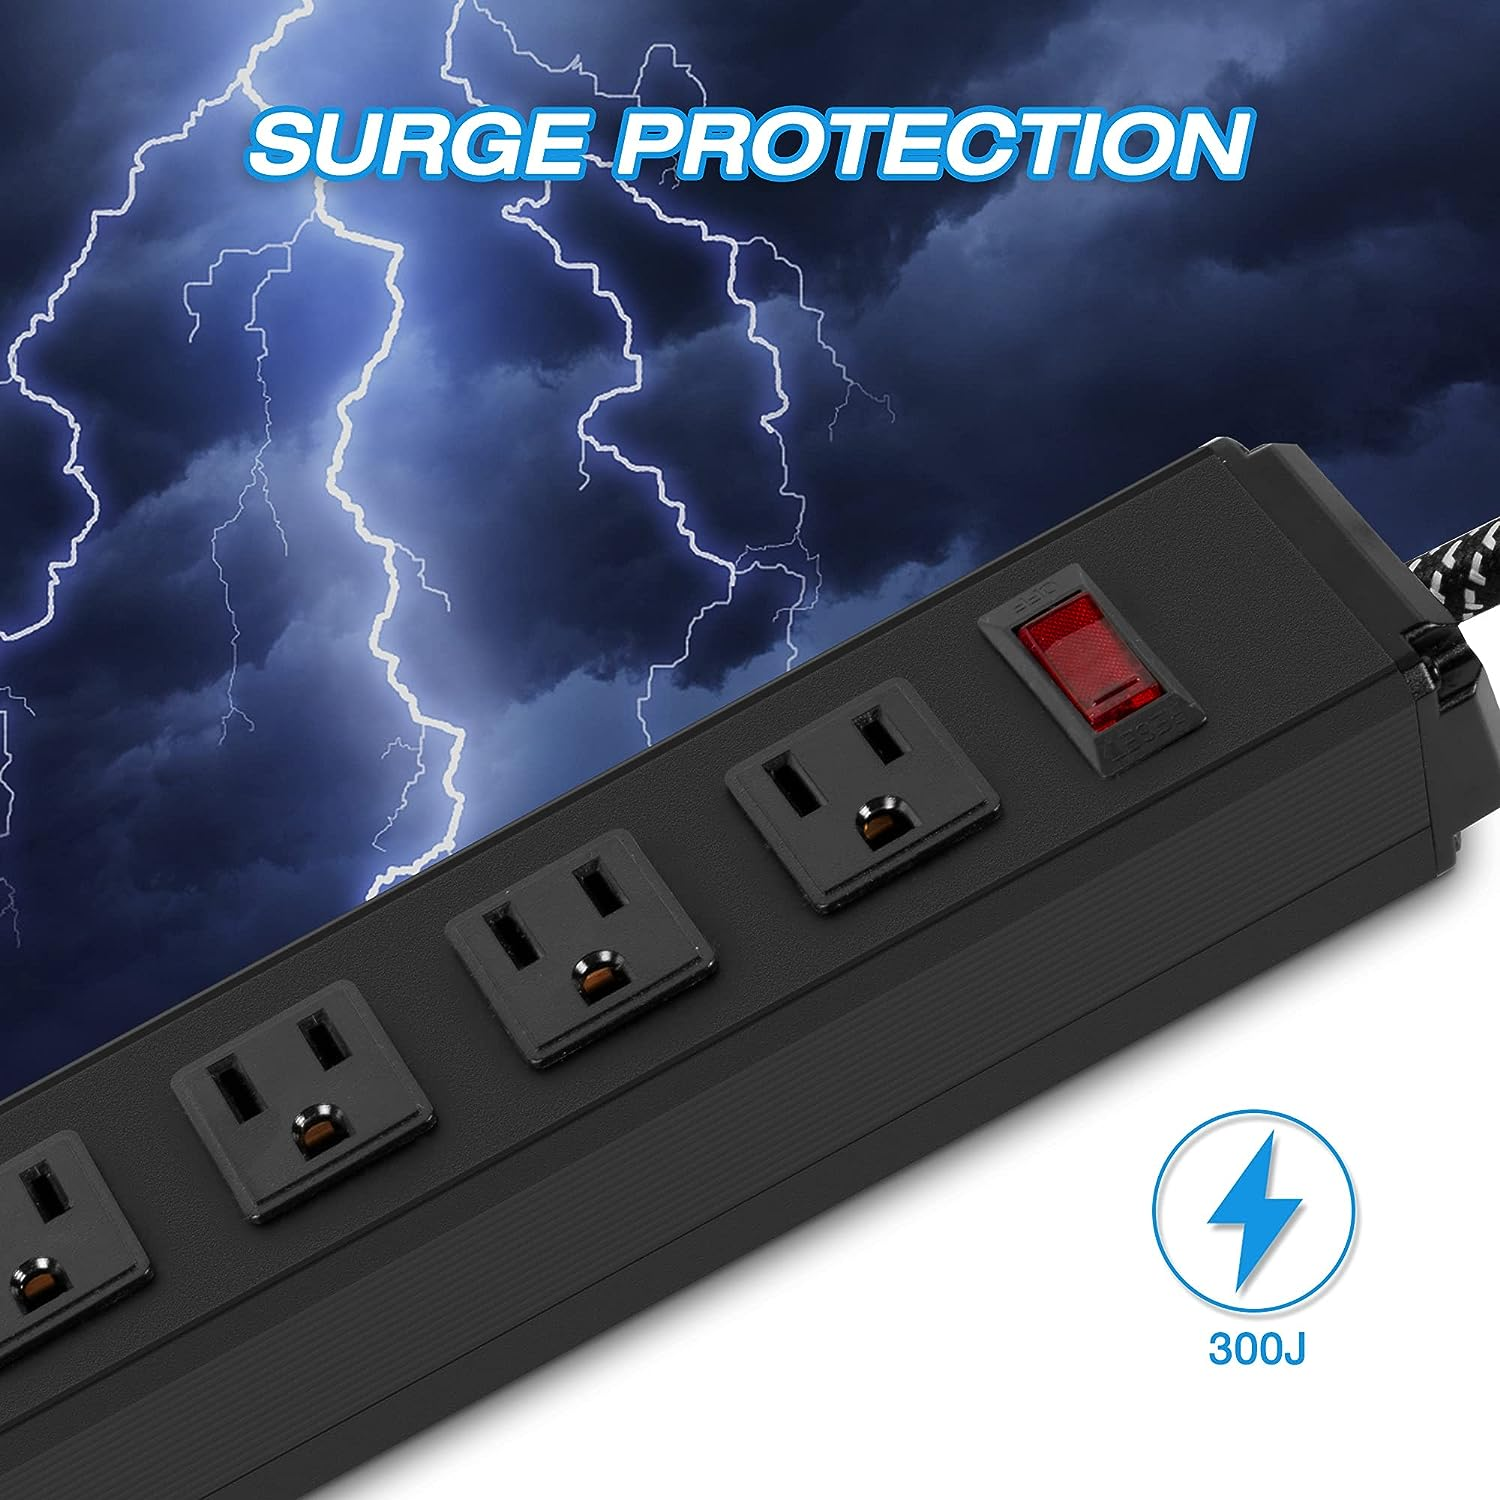 Surge Protector Power Strip with Outlets and USB Charging Ports 6-Foot Cord for Home, Office -Black (2, 6 outlets)